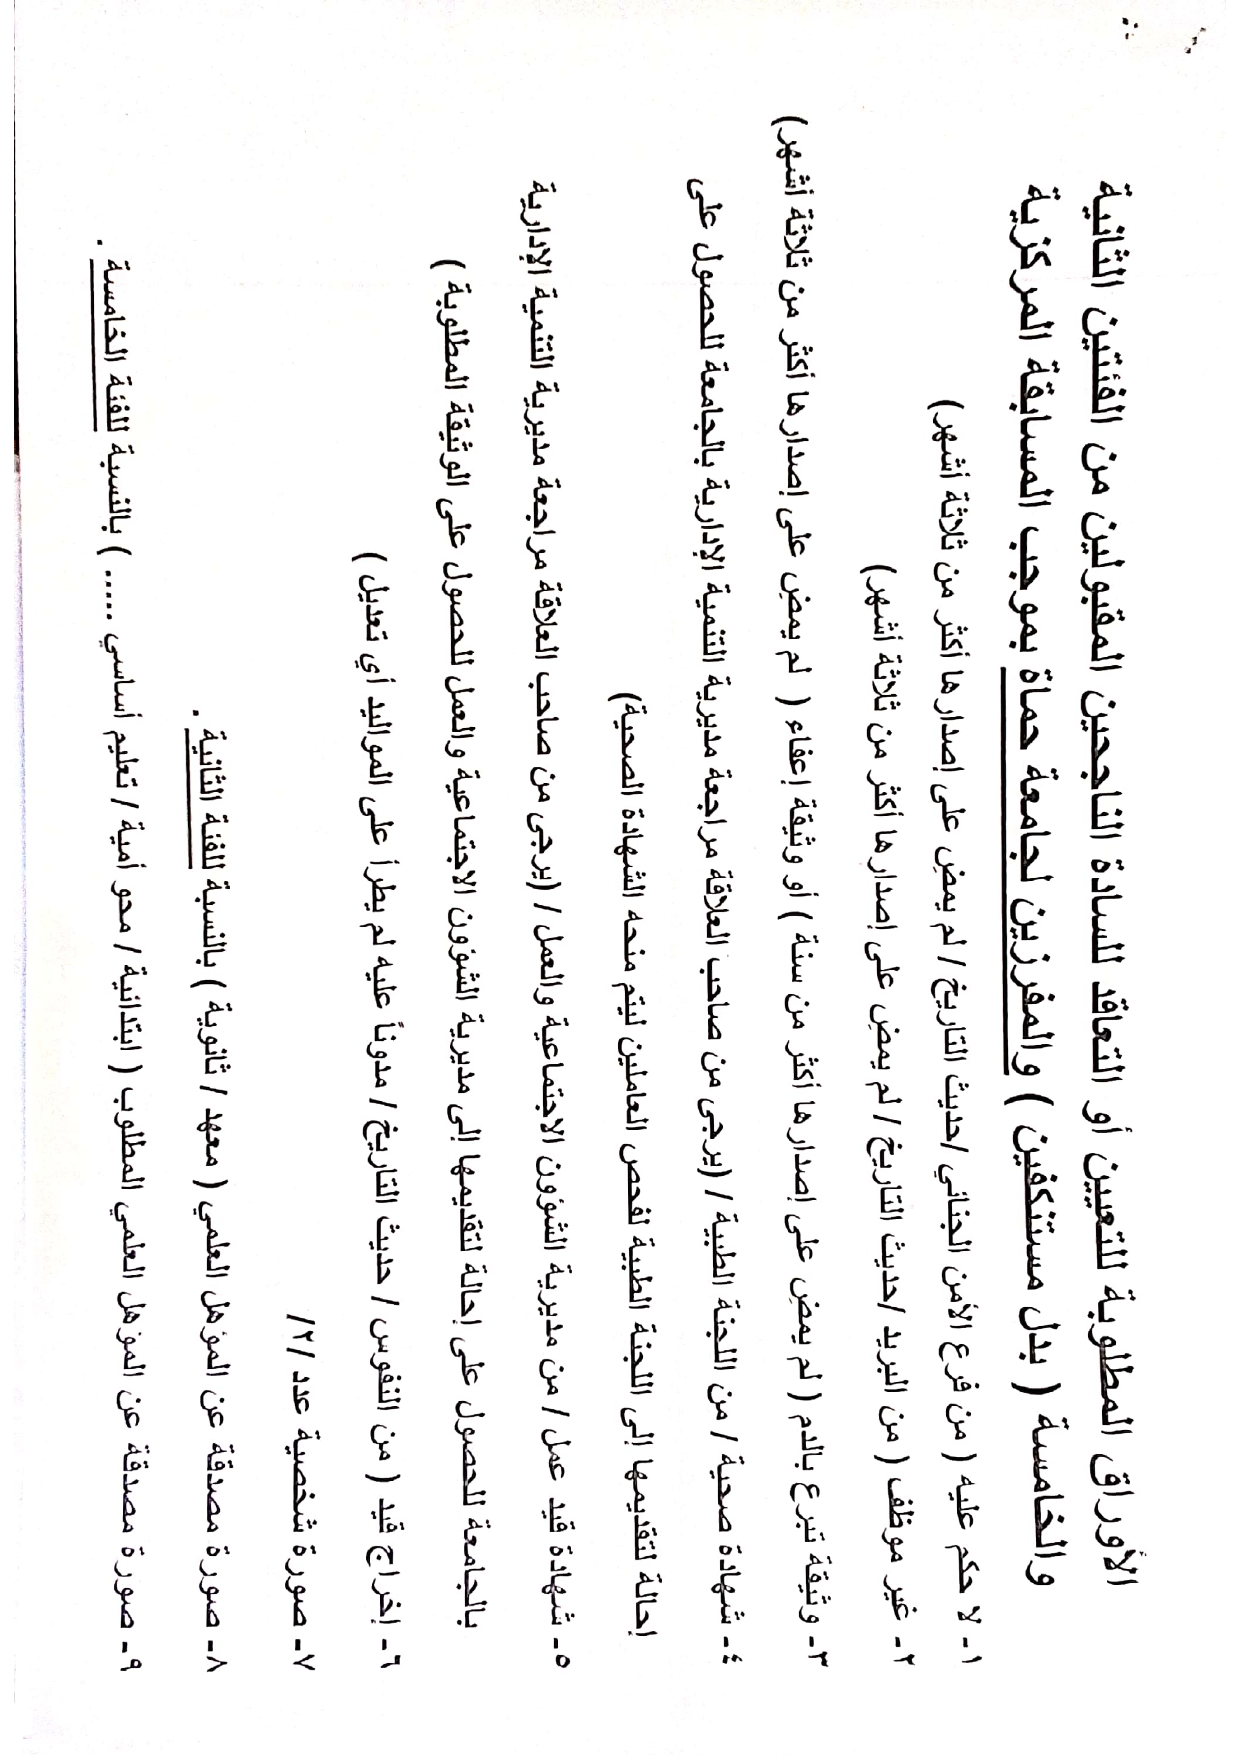 CamScanner ٠٩ ٠٦ ٢٠٢٣ ١٣.٠٢ page 0002